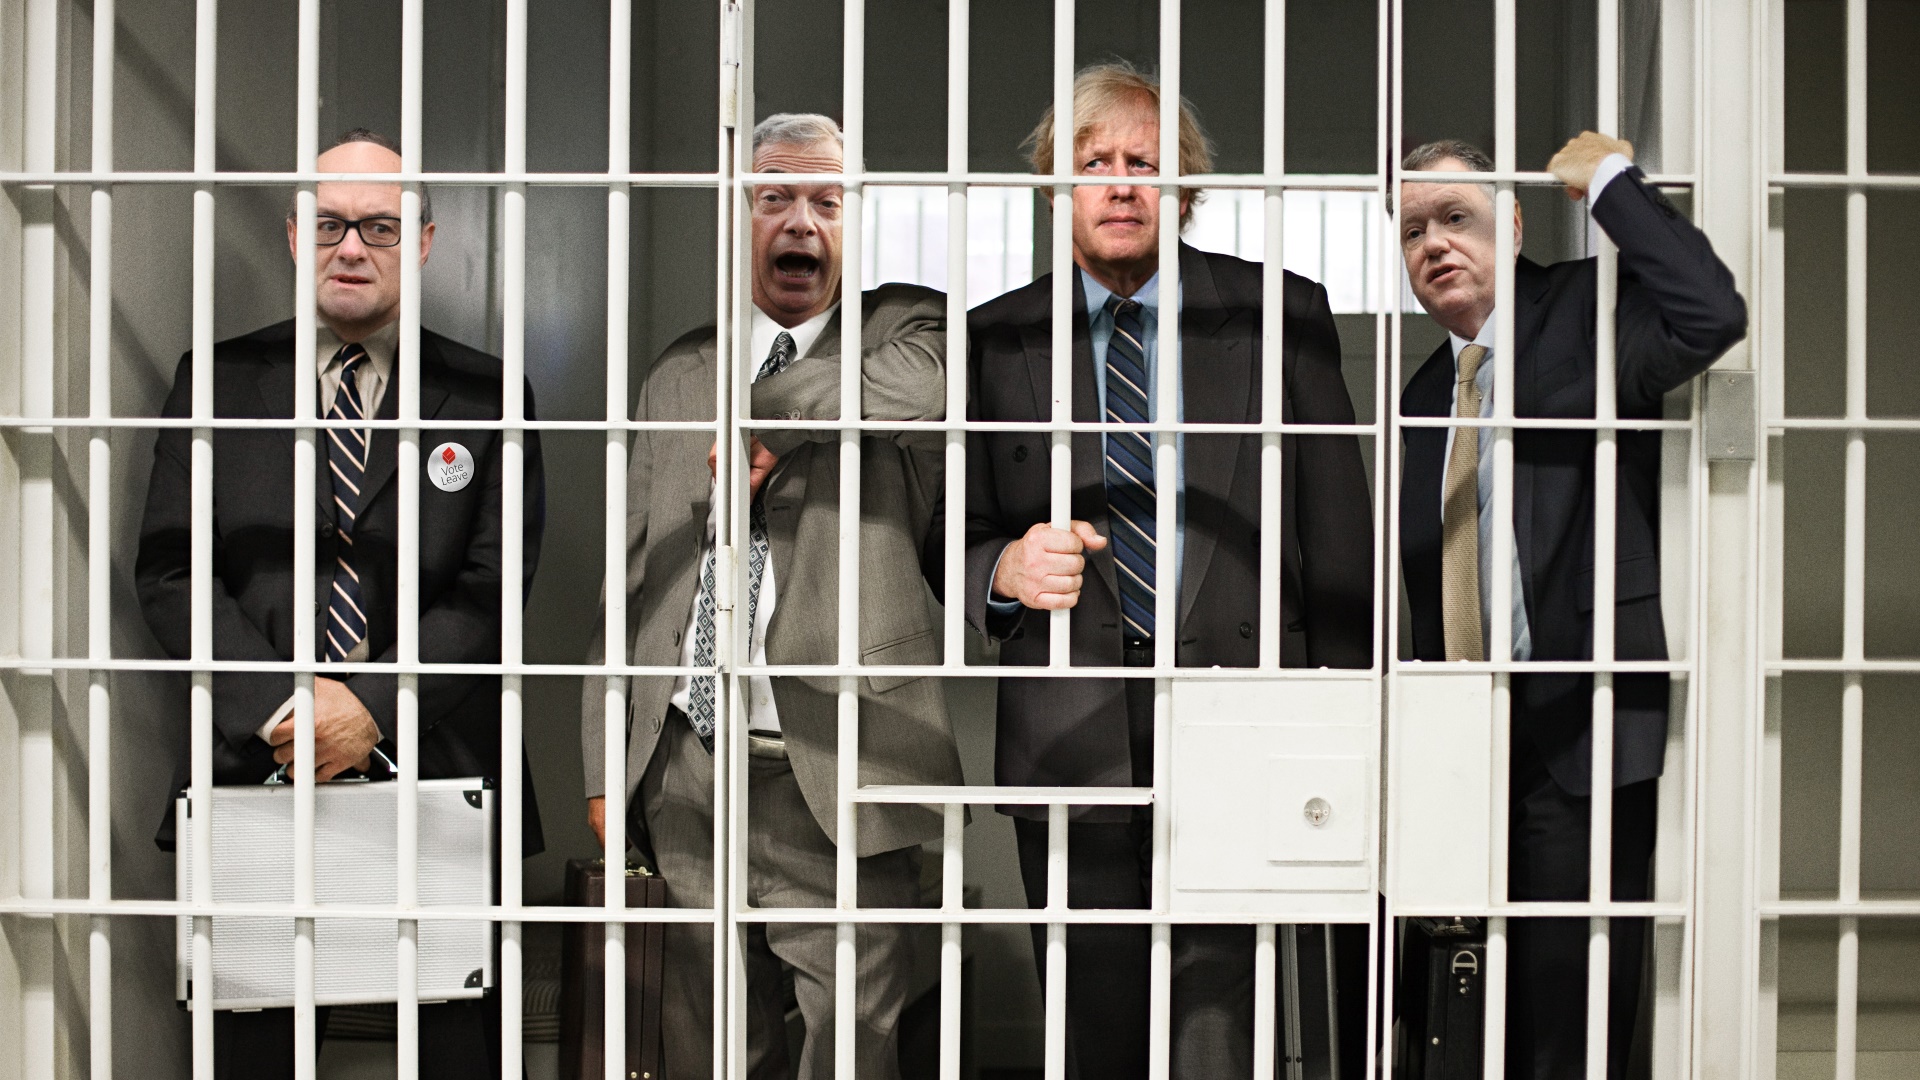 Locked down or locked up? The chief players in achieving a hard Brexit: Dominic Cummings, Nigel Farage, Boris Johnson and Lord Frost. Image: The New European/Getty